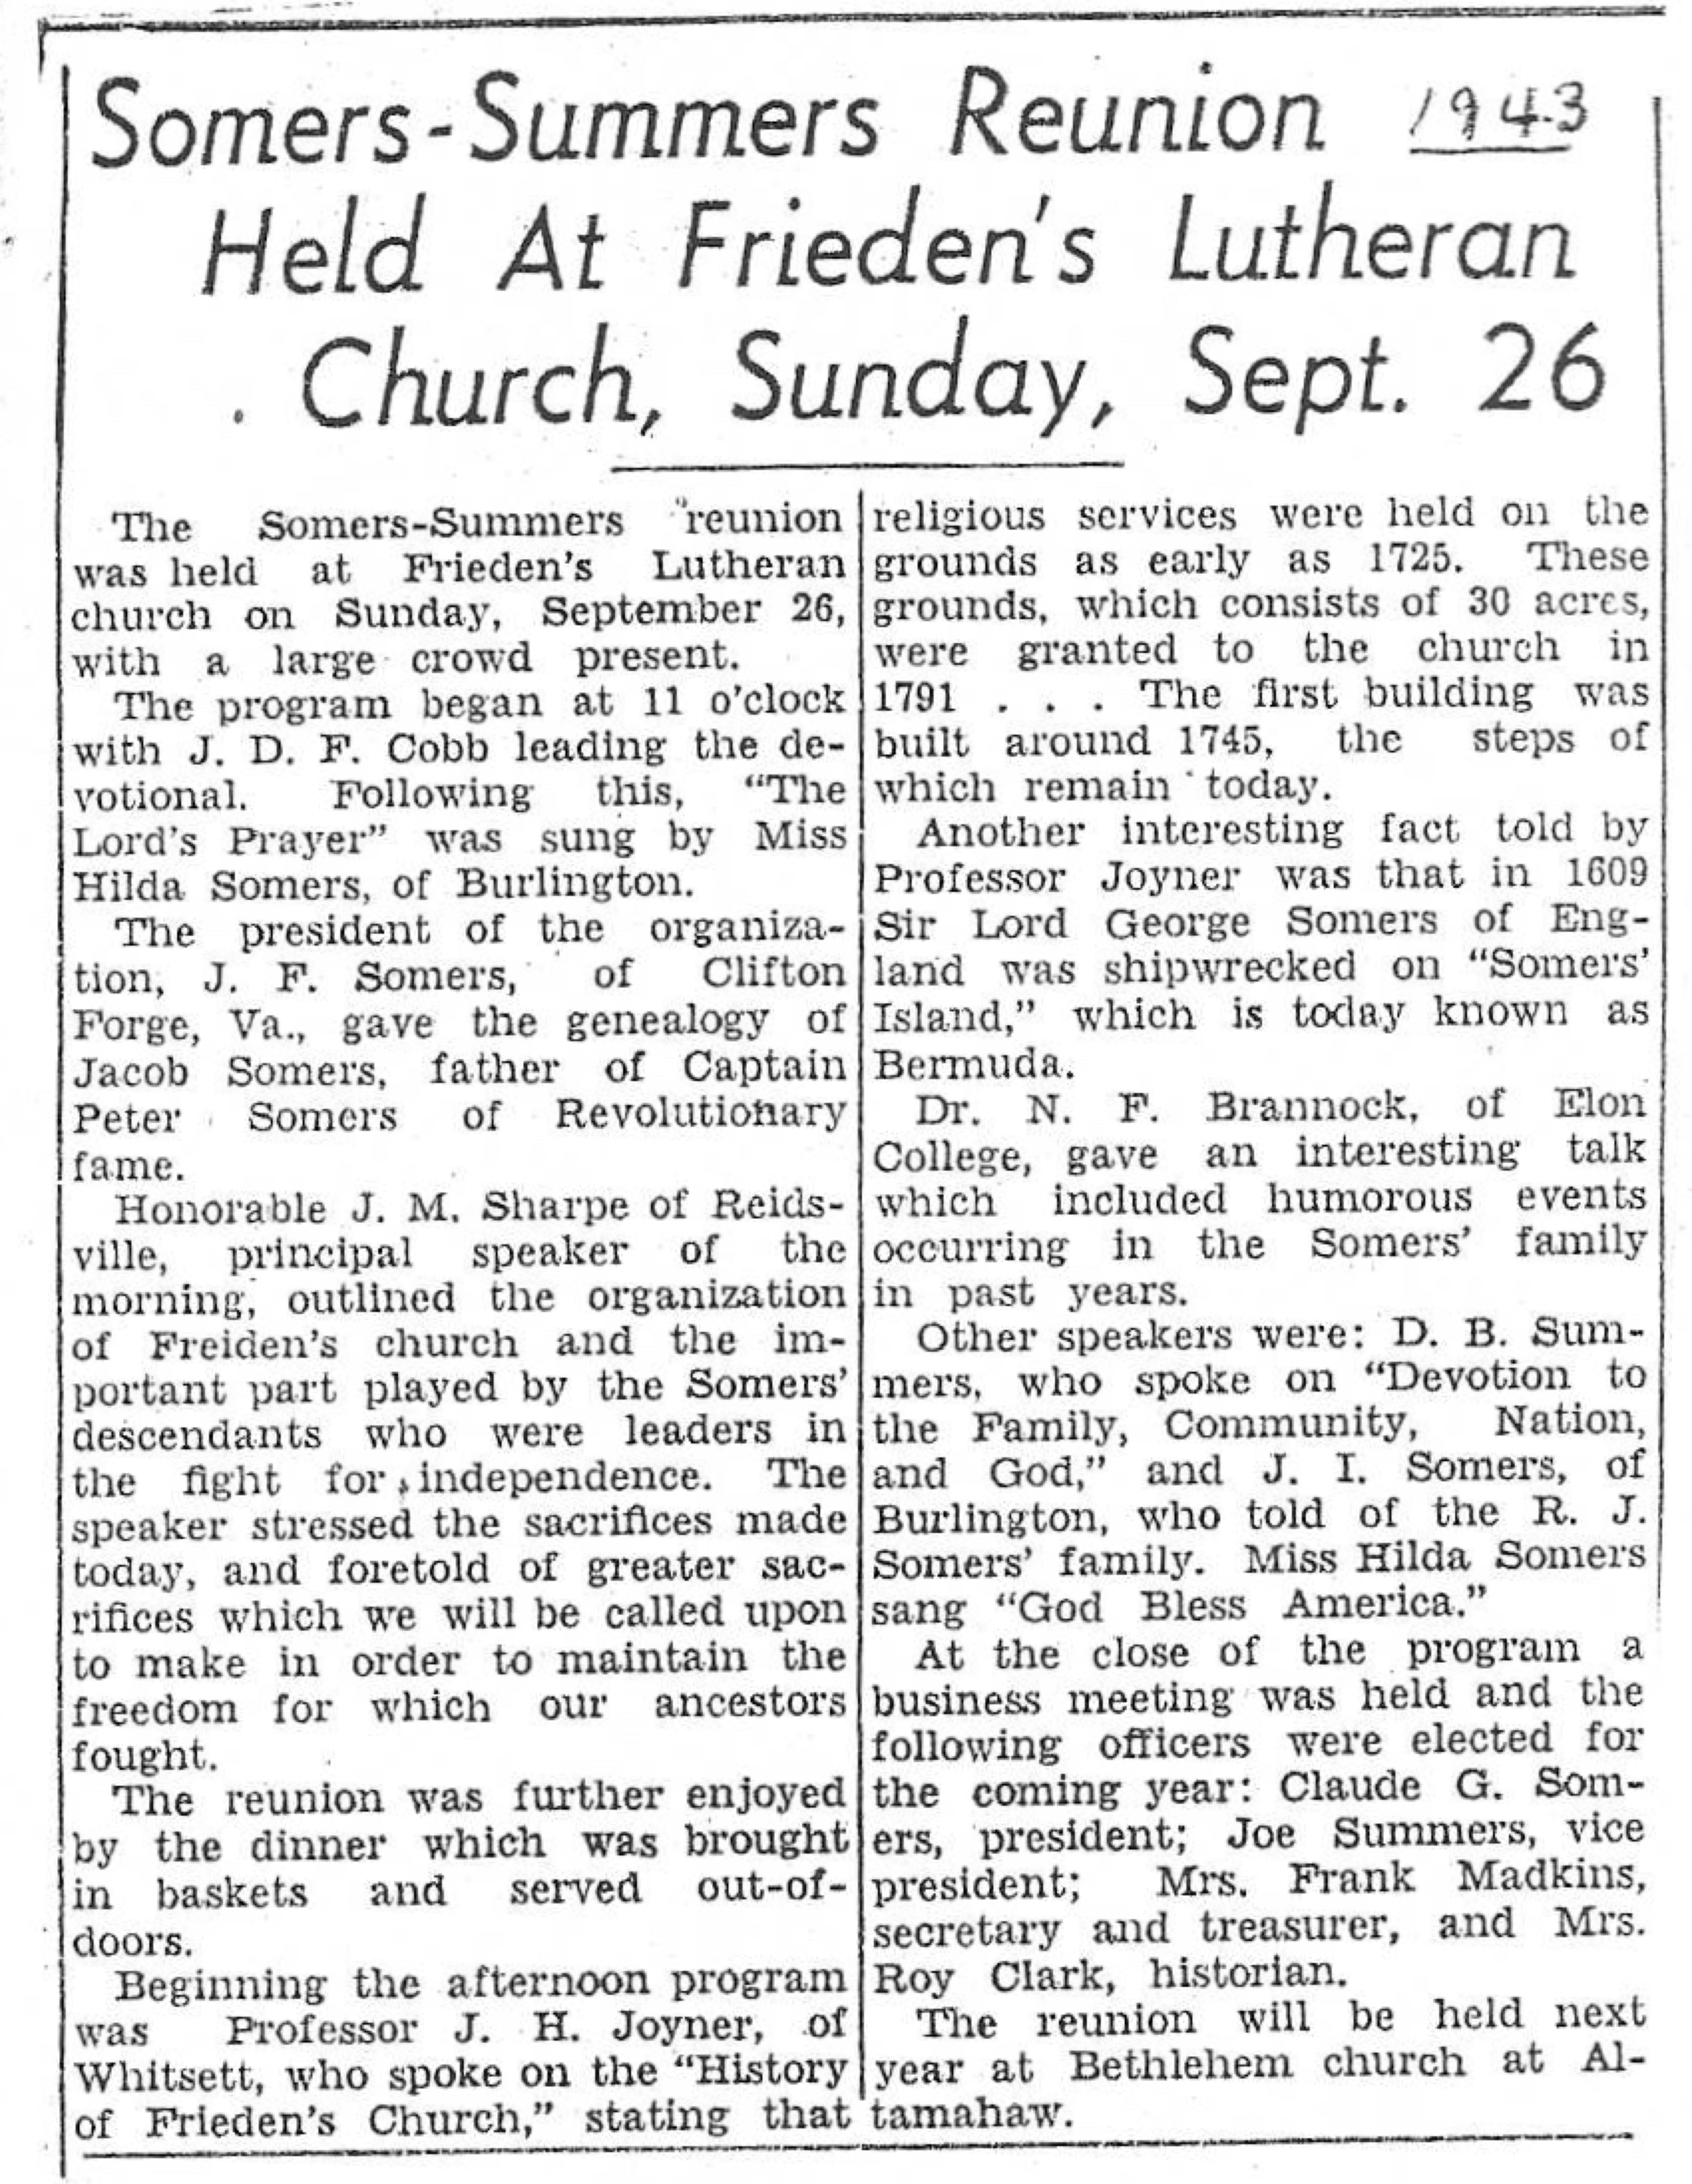 1943 Newspaper
        Clipping of Reunion